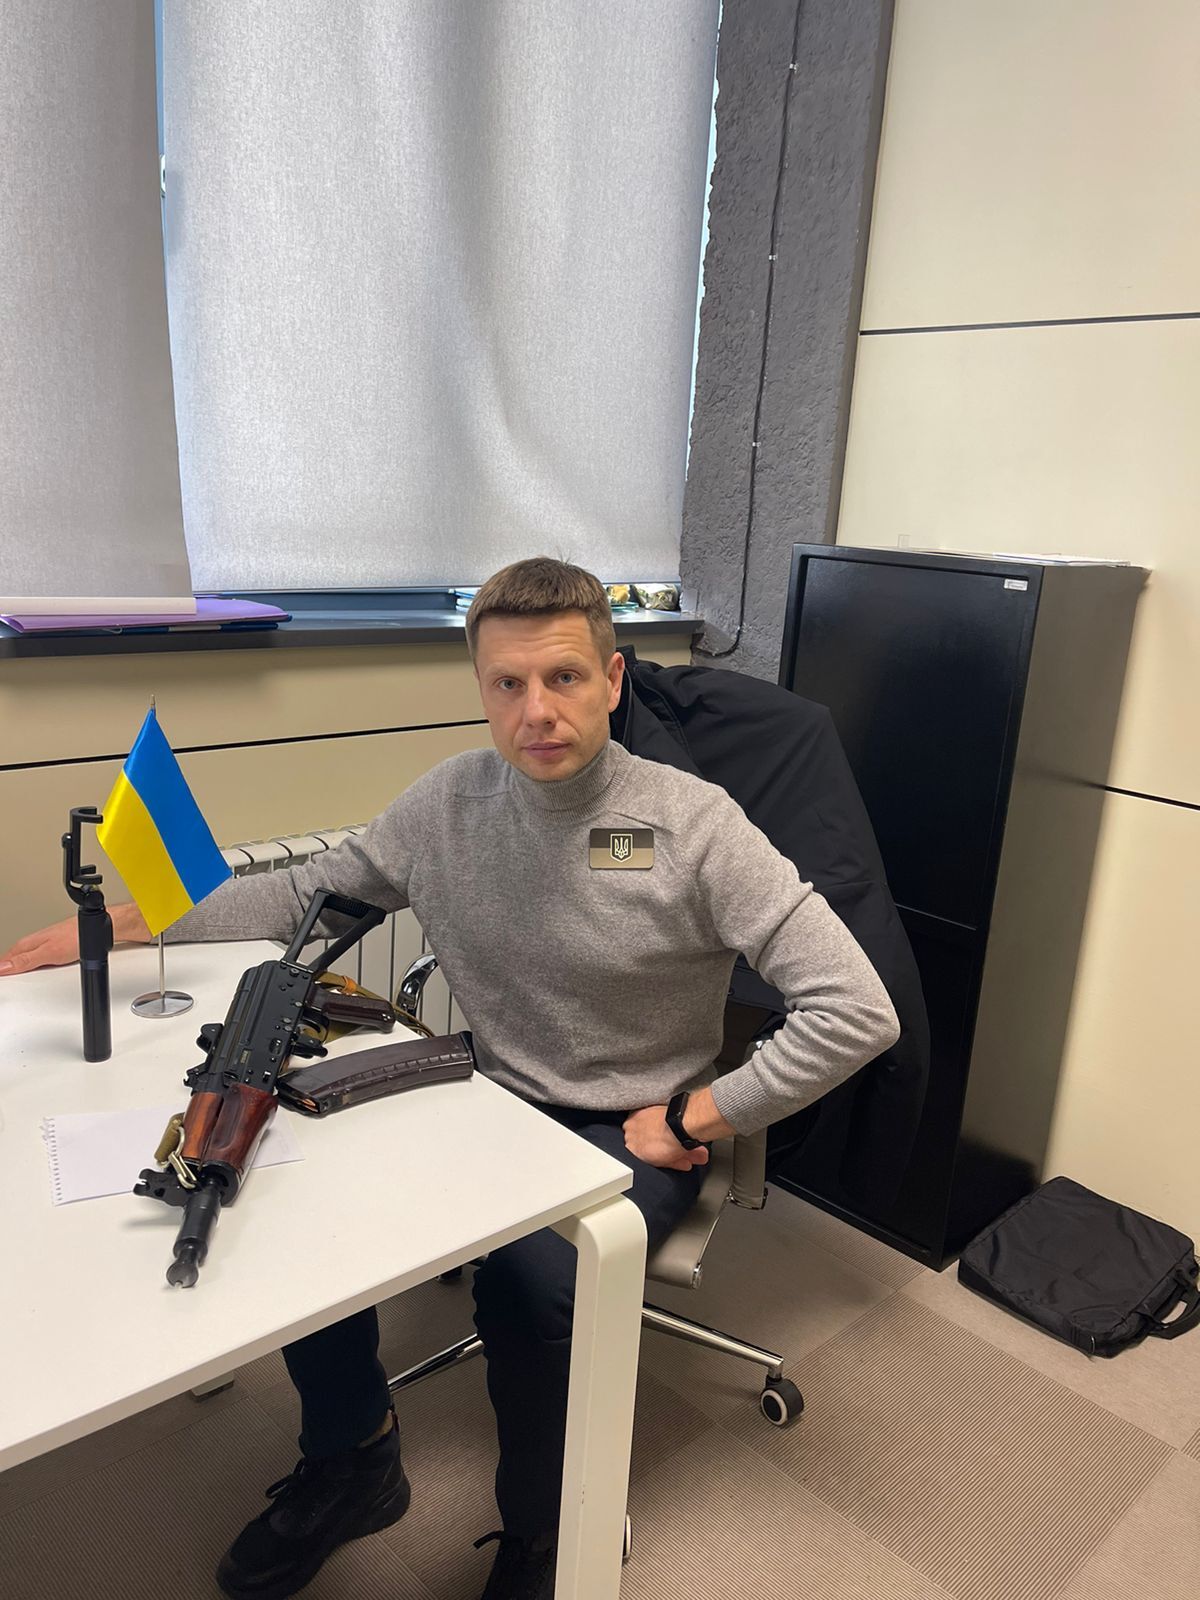 Goncharenko with the rifle given to him by the Ukrainian authorities.